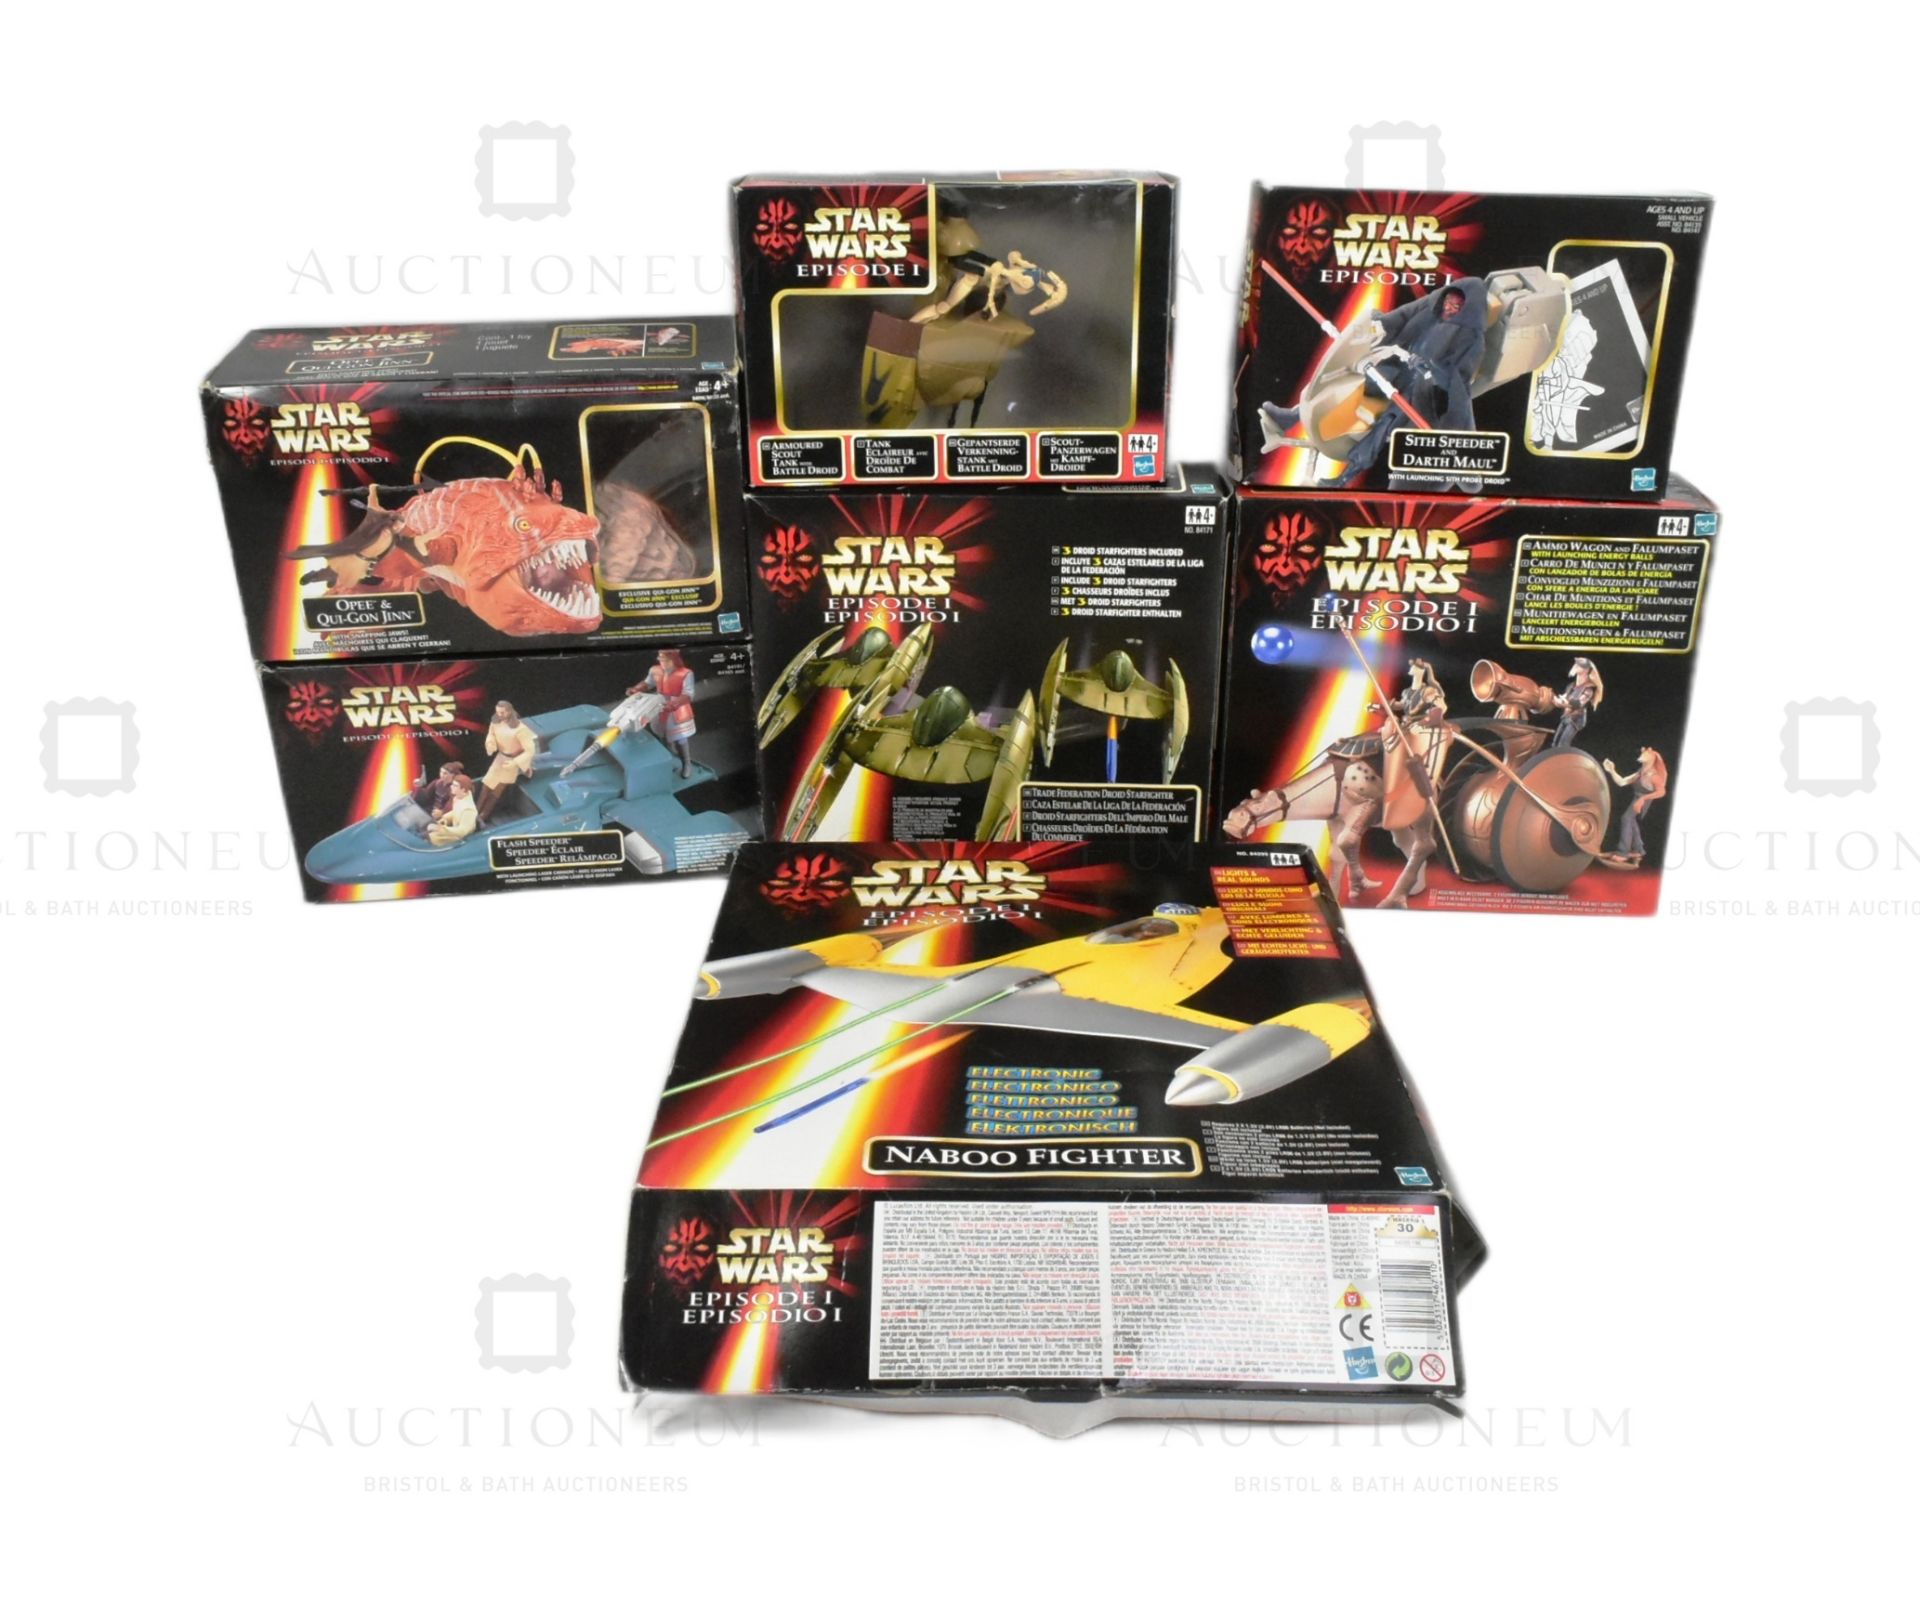 STAR WARS - EPISODE I - COLLECTION OF ACTION FIGURE PLAYSETS